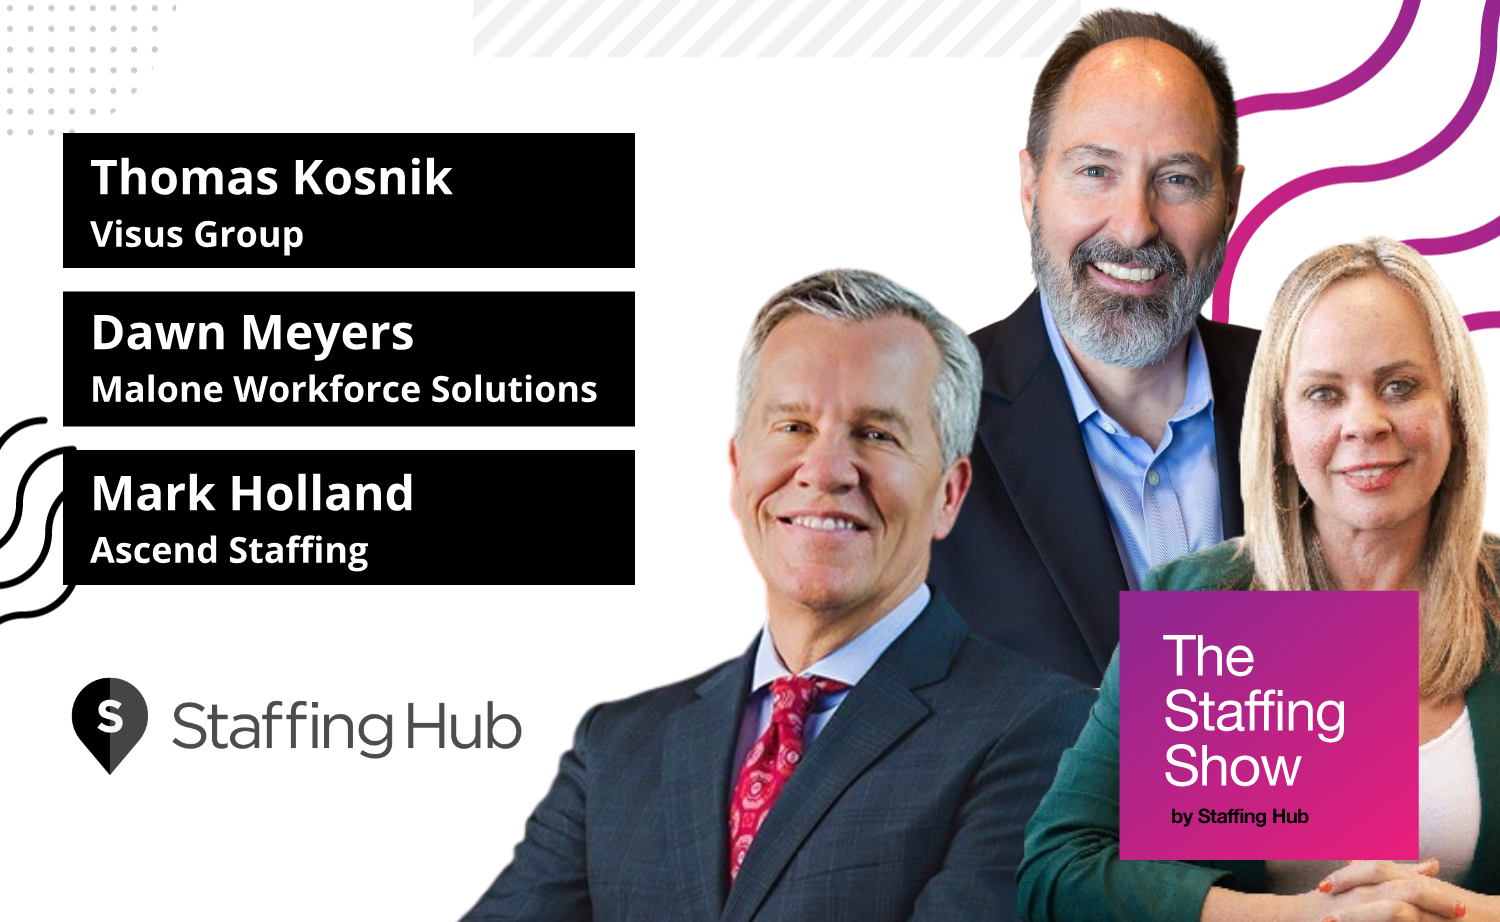 Thomas Kosnik, Dawn Meyers, and Mark Holland on Leadership in the Staffing Industry